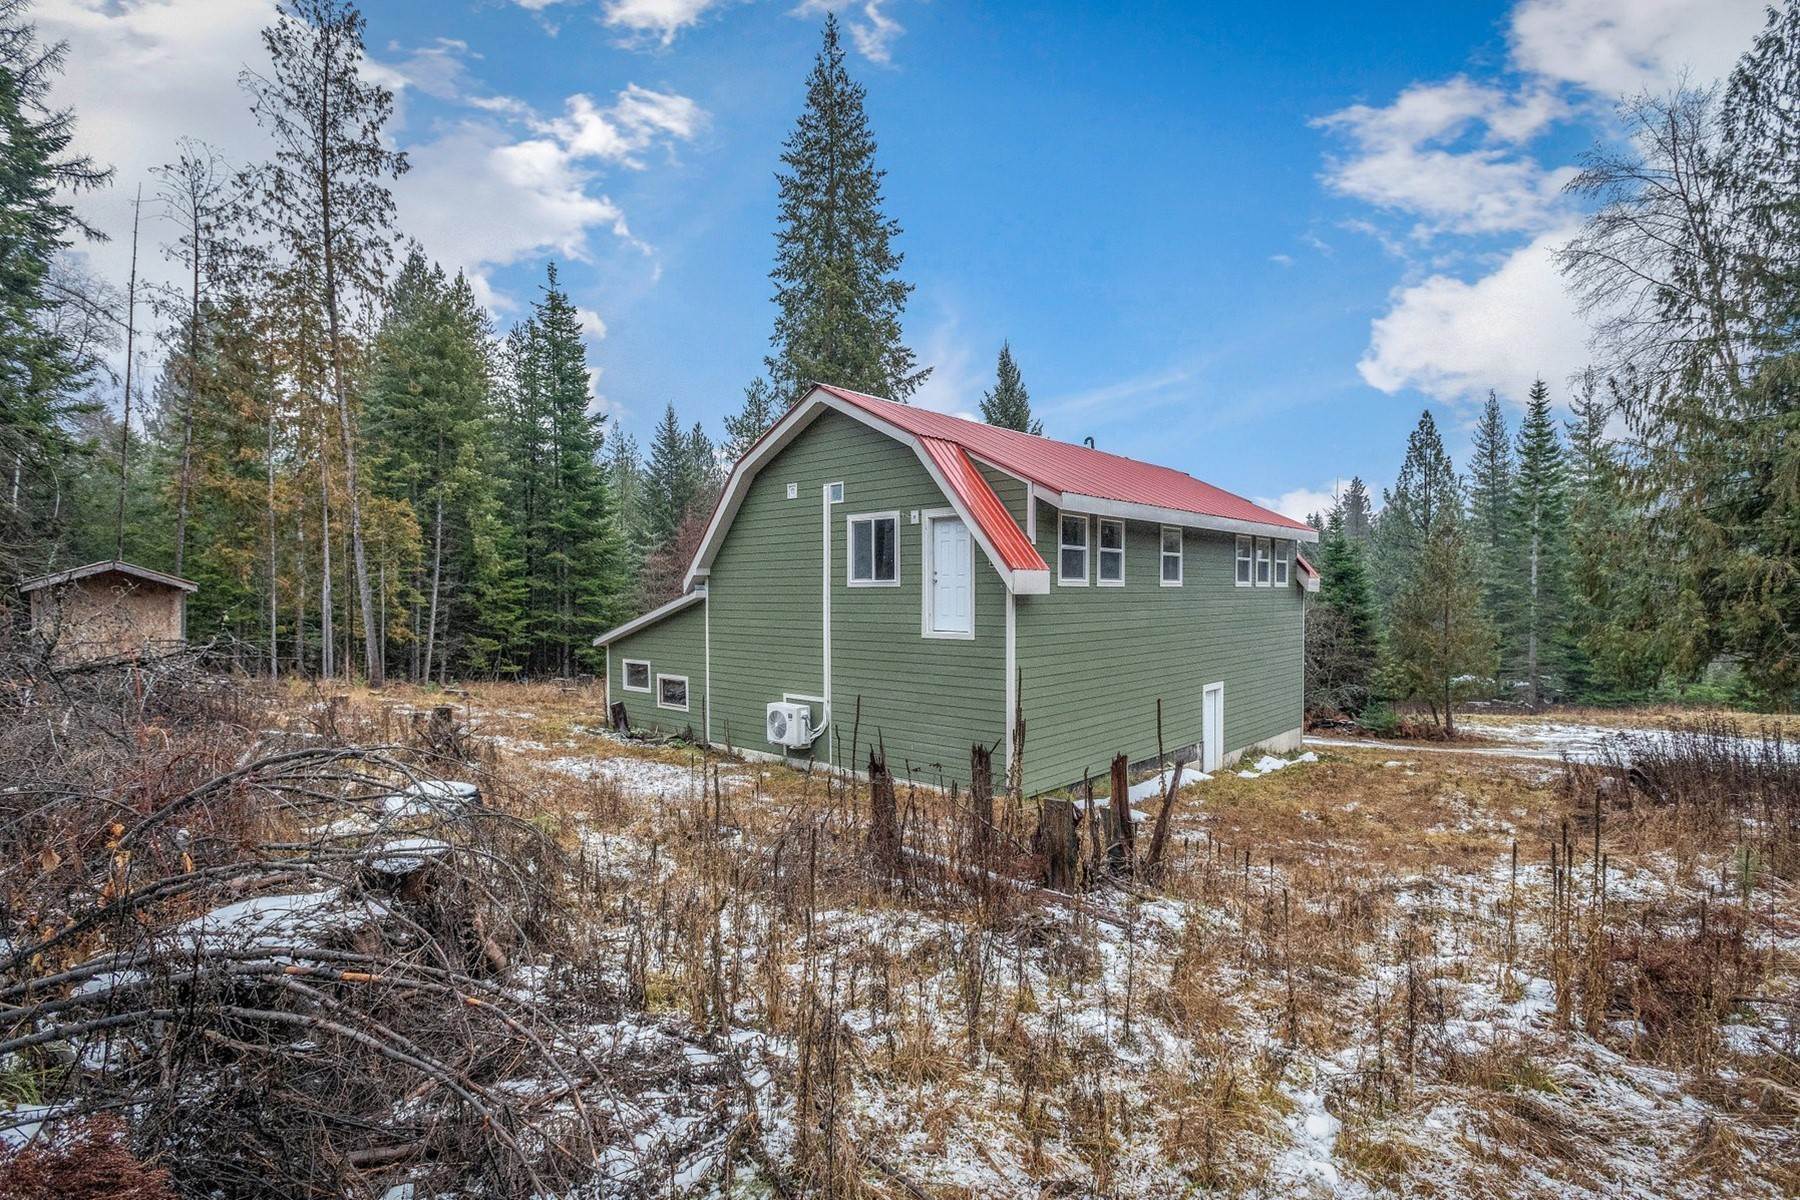 41. Single Family Homes for Sale at 214 Springdale Gardens Rd Priest River, Idaho 83856 United States